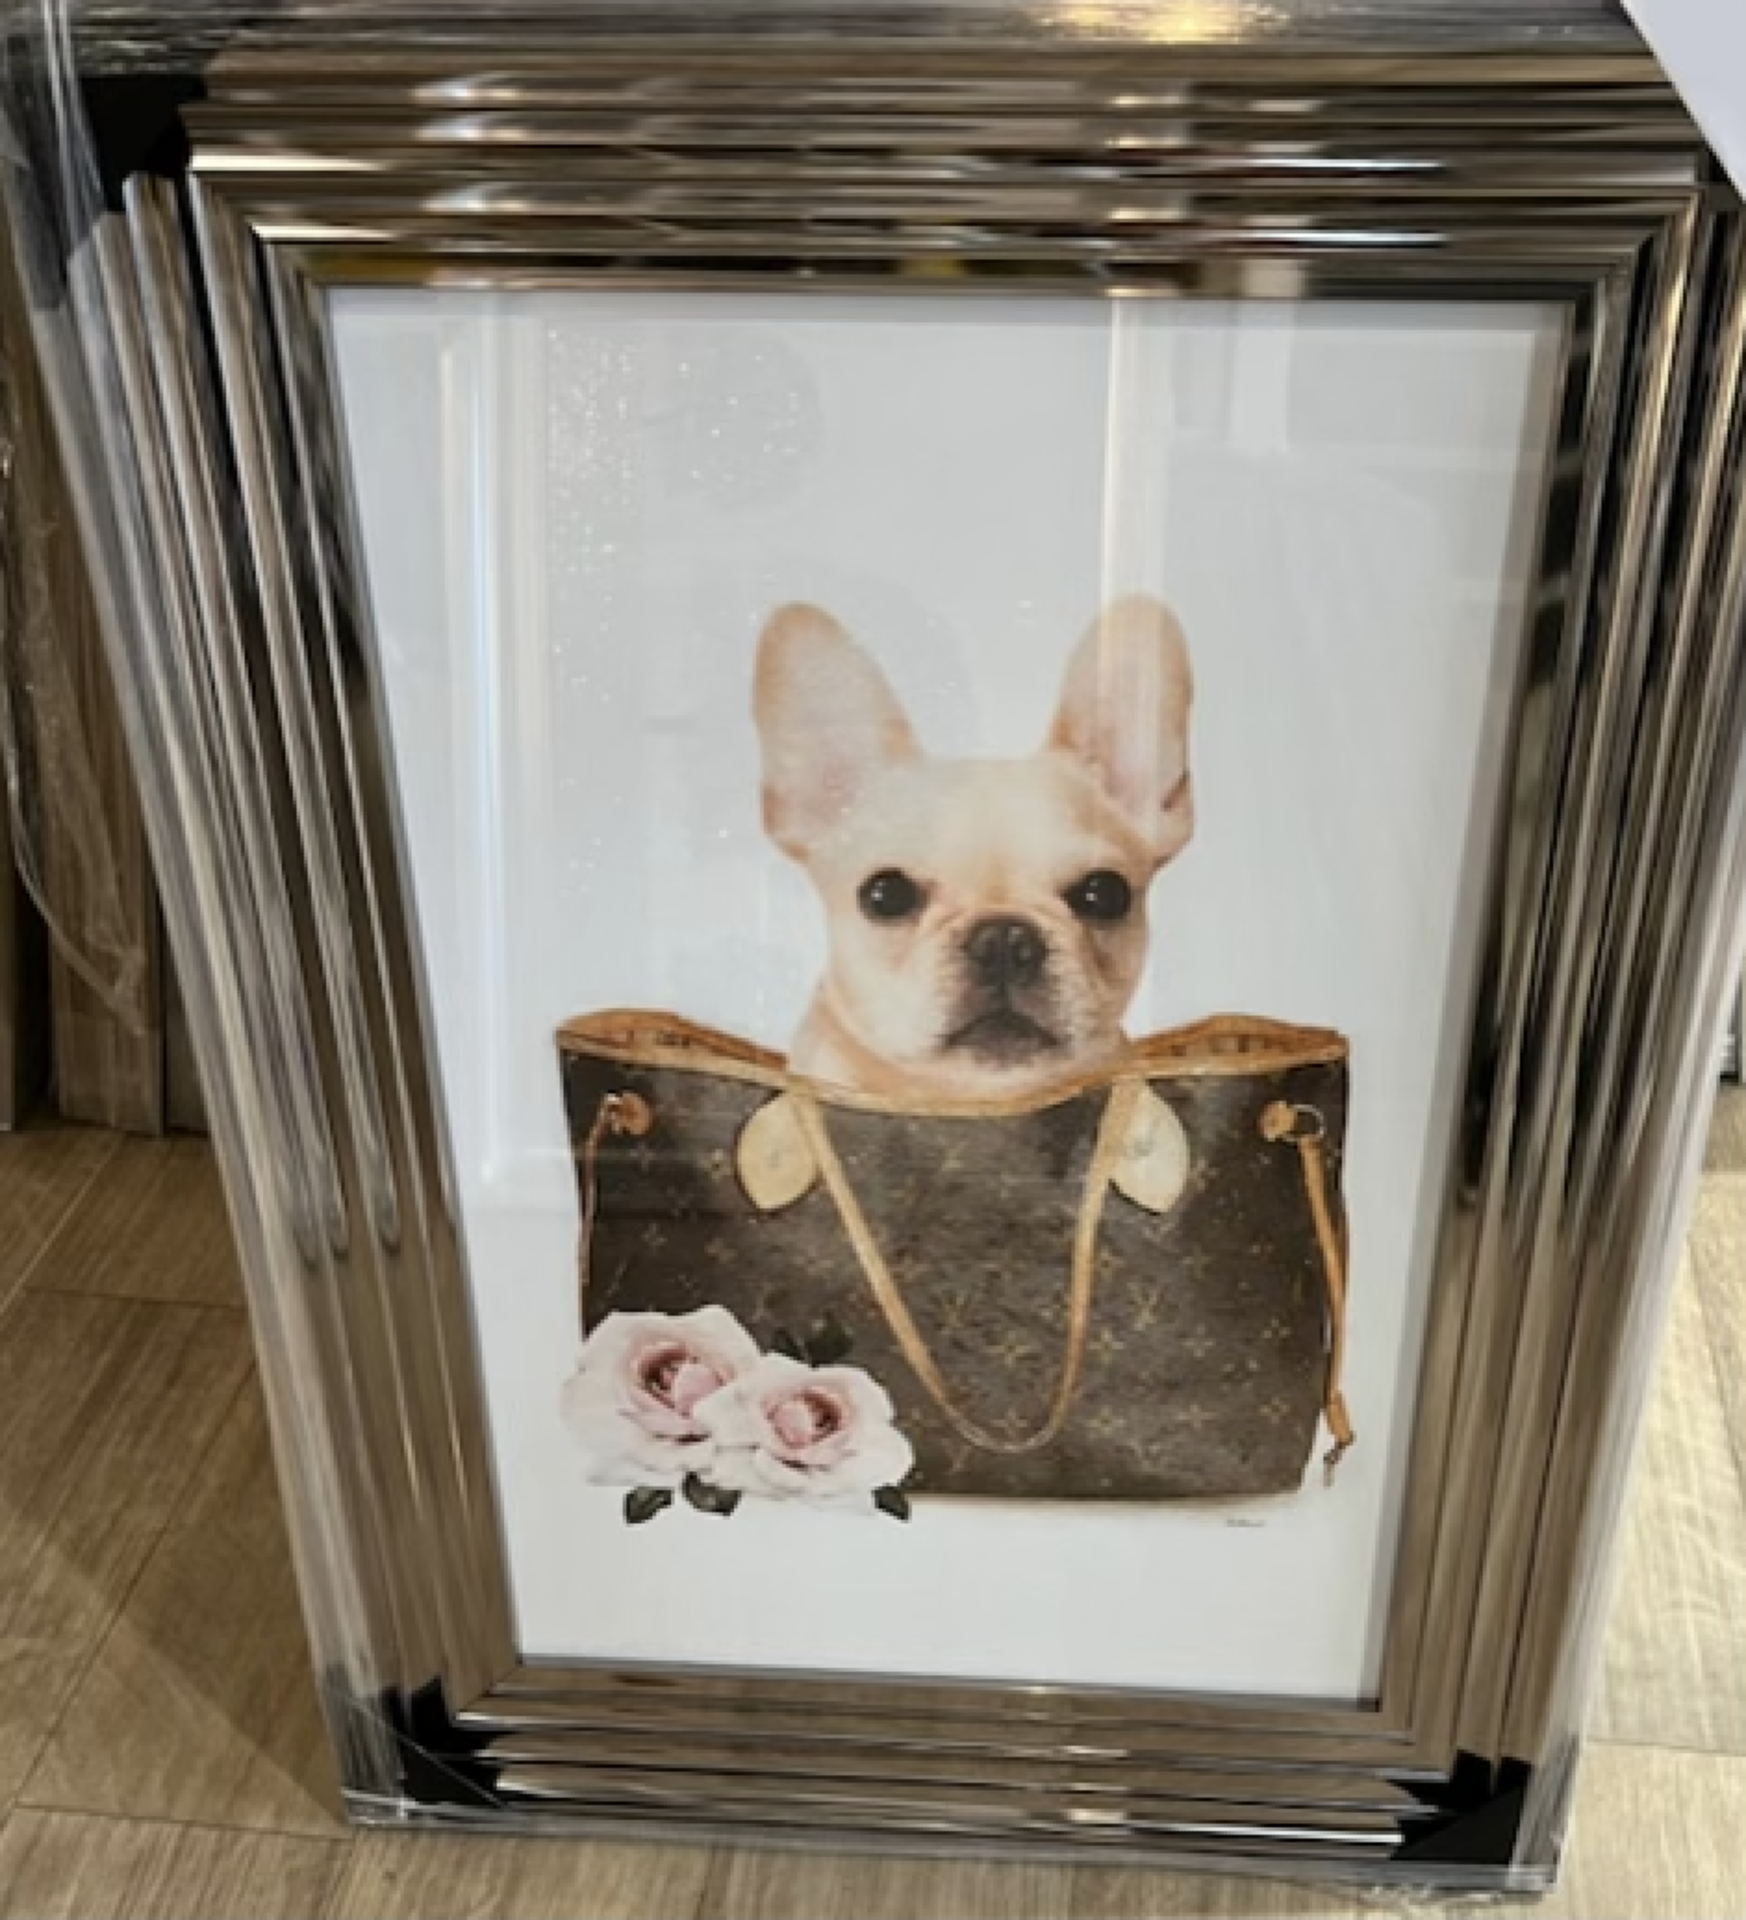 Designer Frenchie in a Handbag art Piece - Brand New - Hand Embellished Art in Three Tier Frame - Image 3 of 4